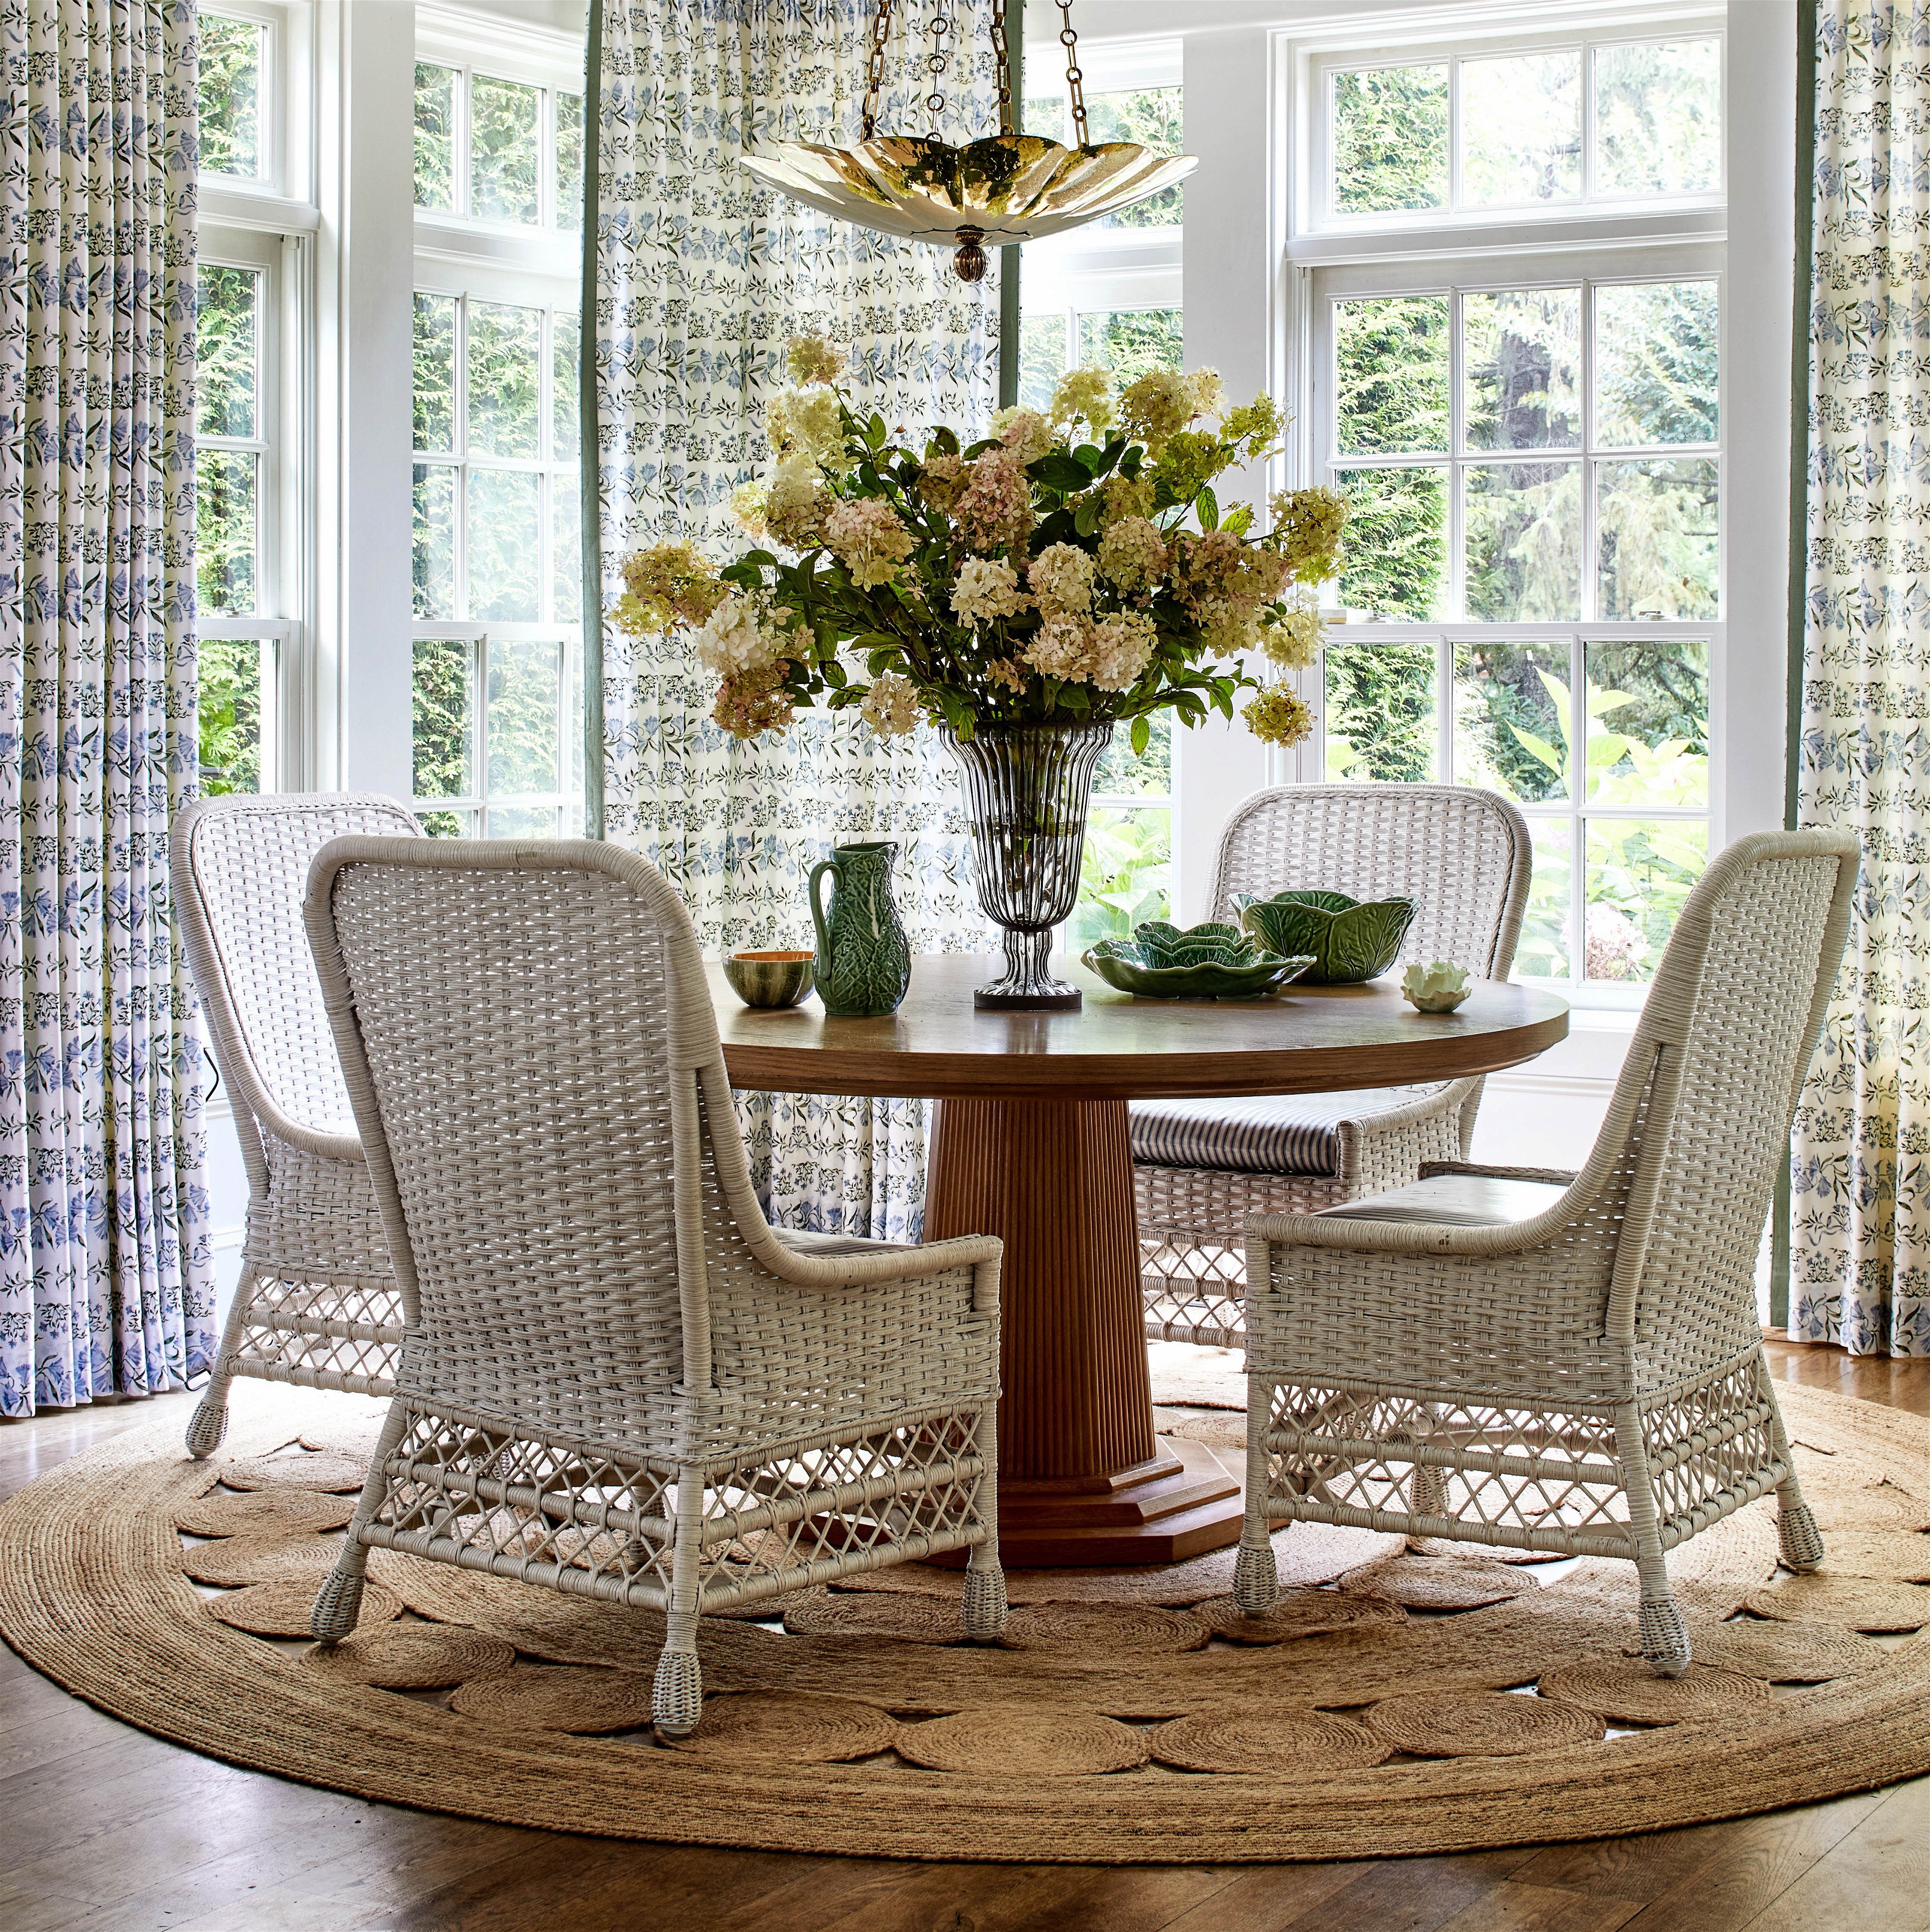 a dining room table with chairs and a vase of flowers